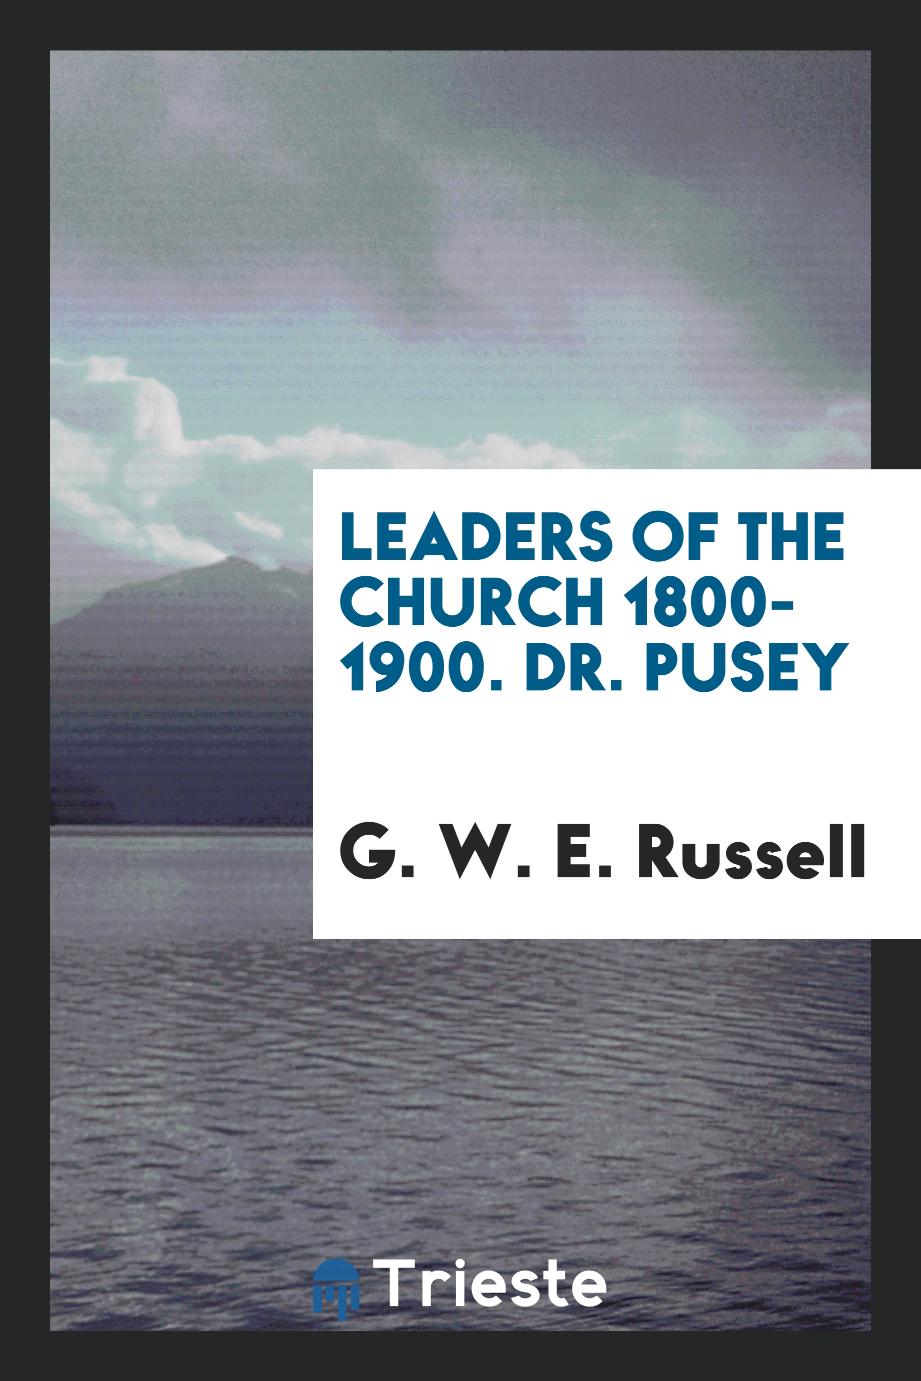 G. W. E. Russell - Leaders of the Church 1800-1900. Dr. Pusey